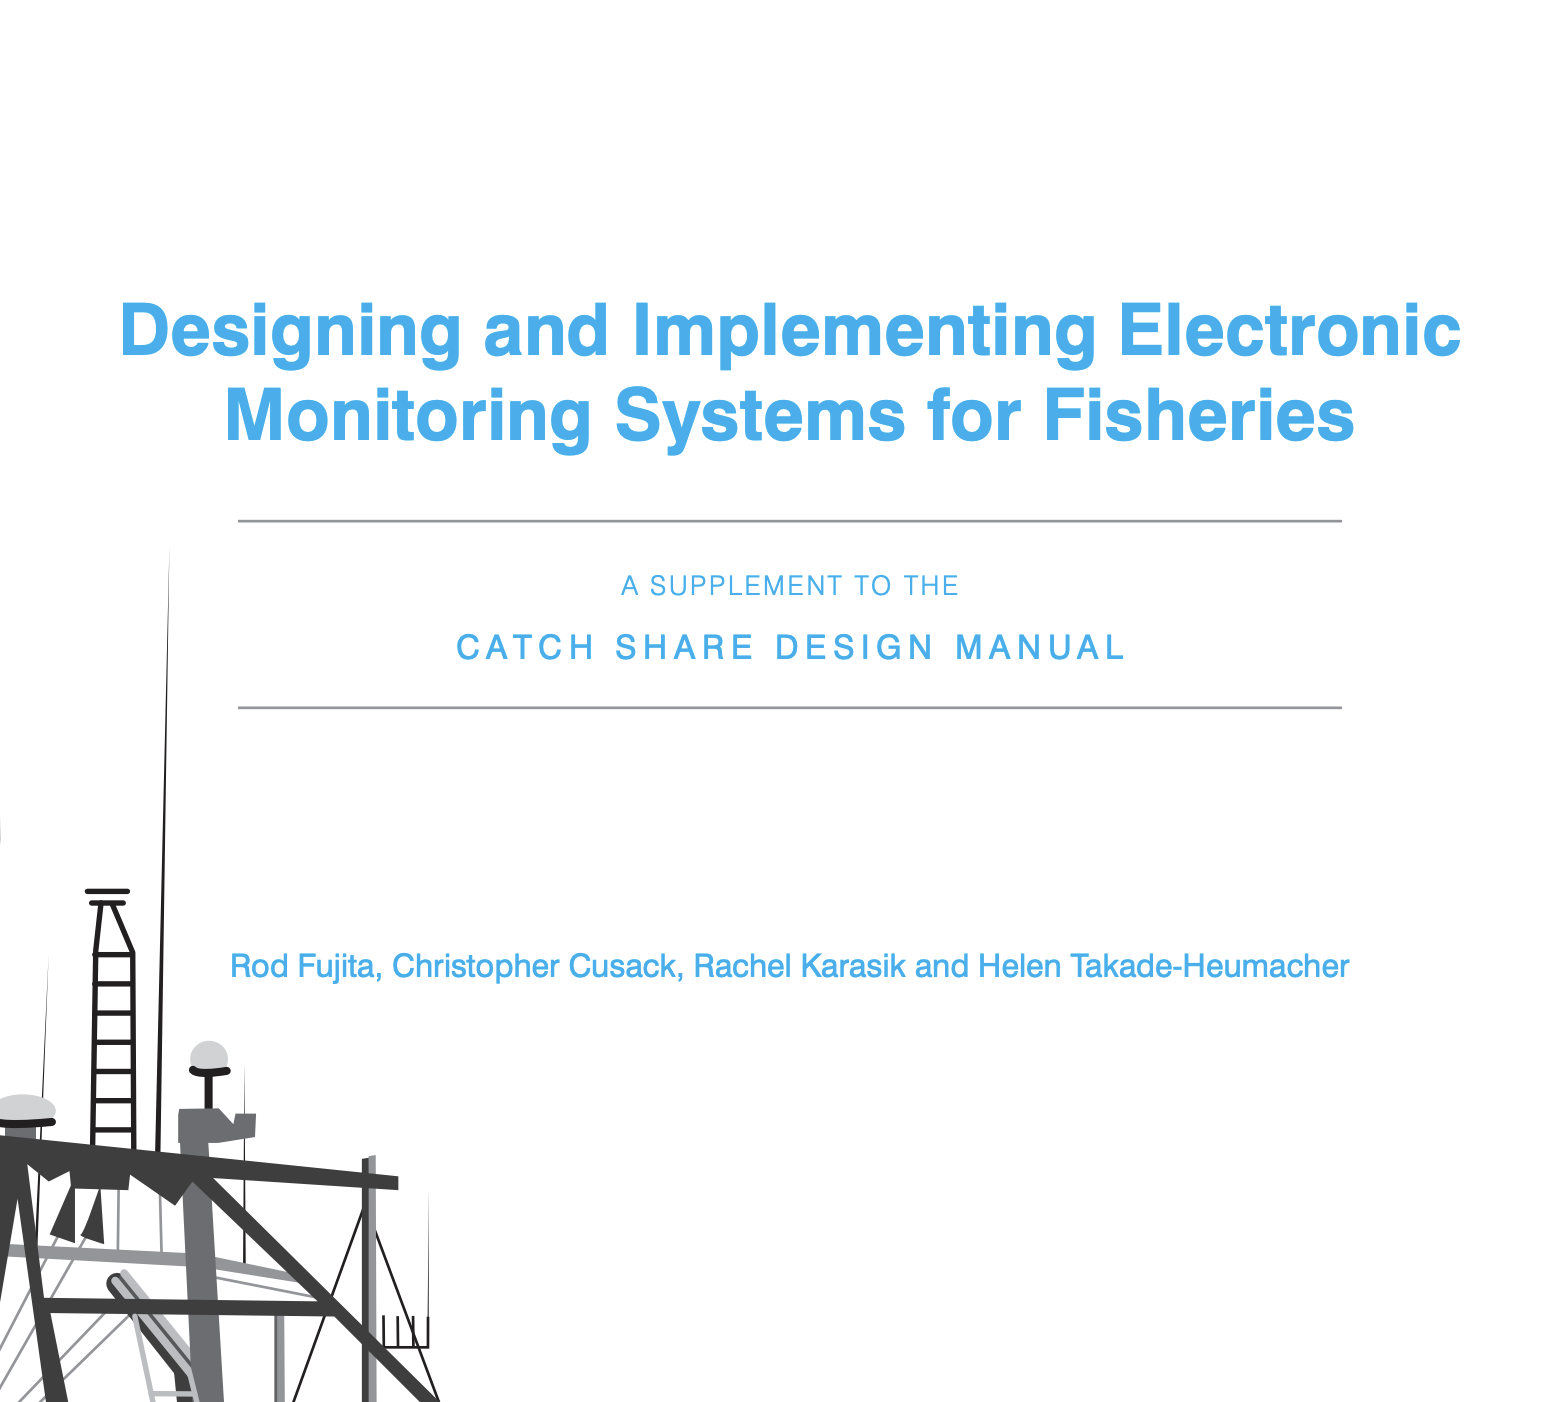 Designing and Implementing Electronic Monitoring Systems for Fisheries